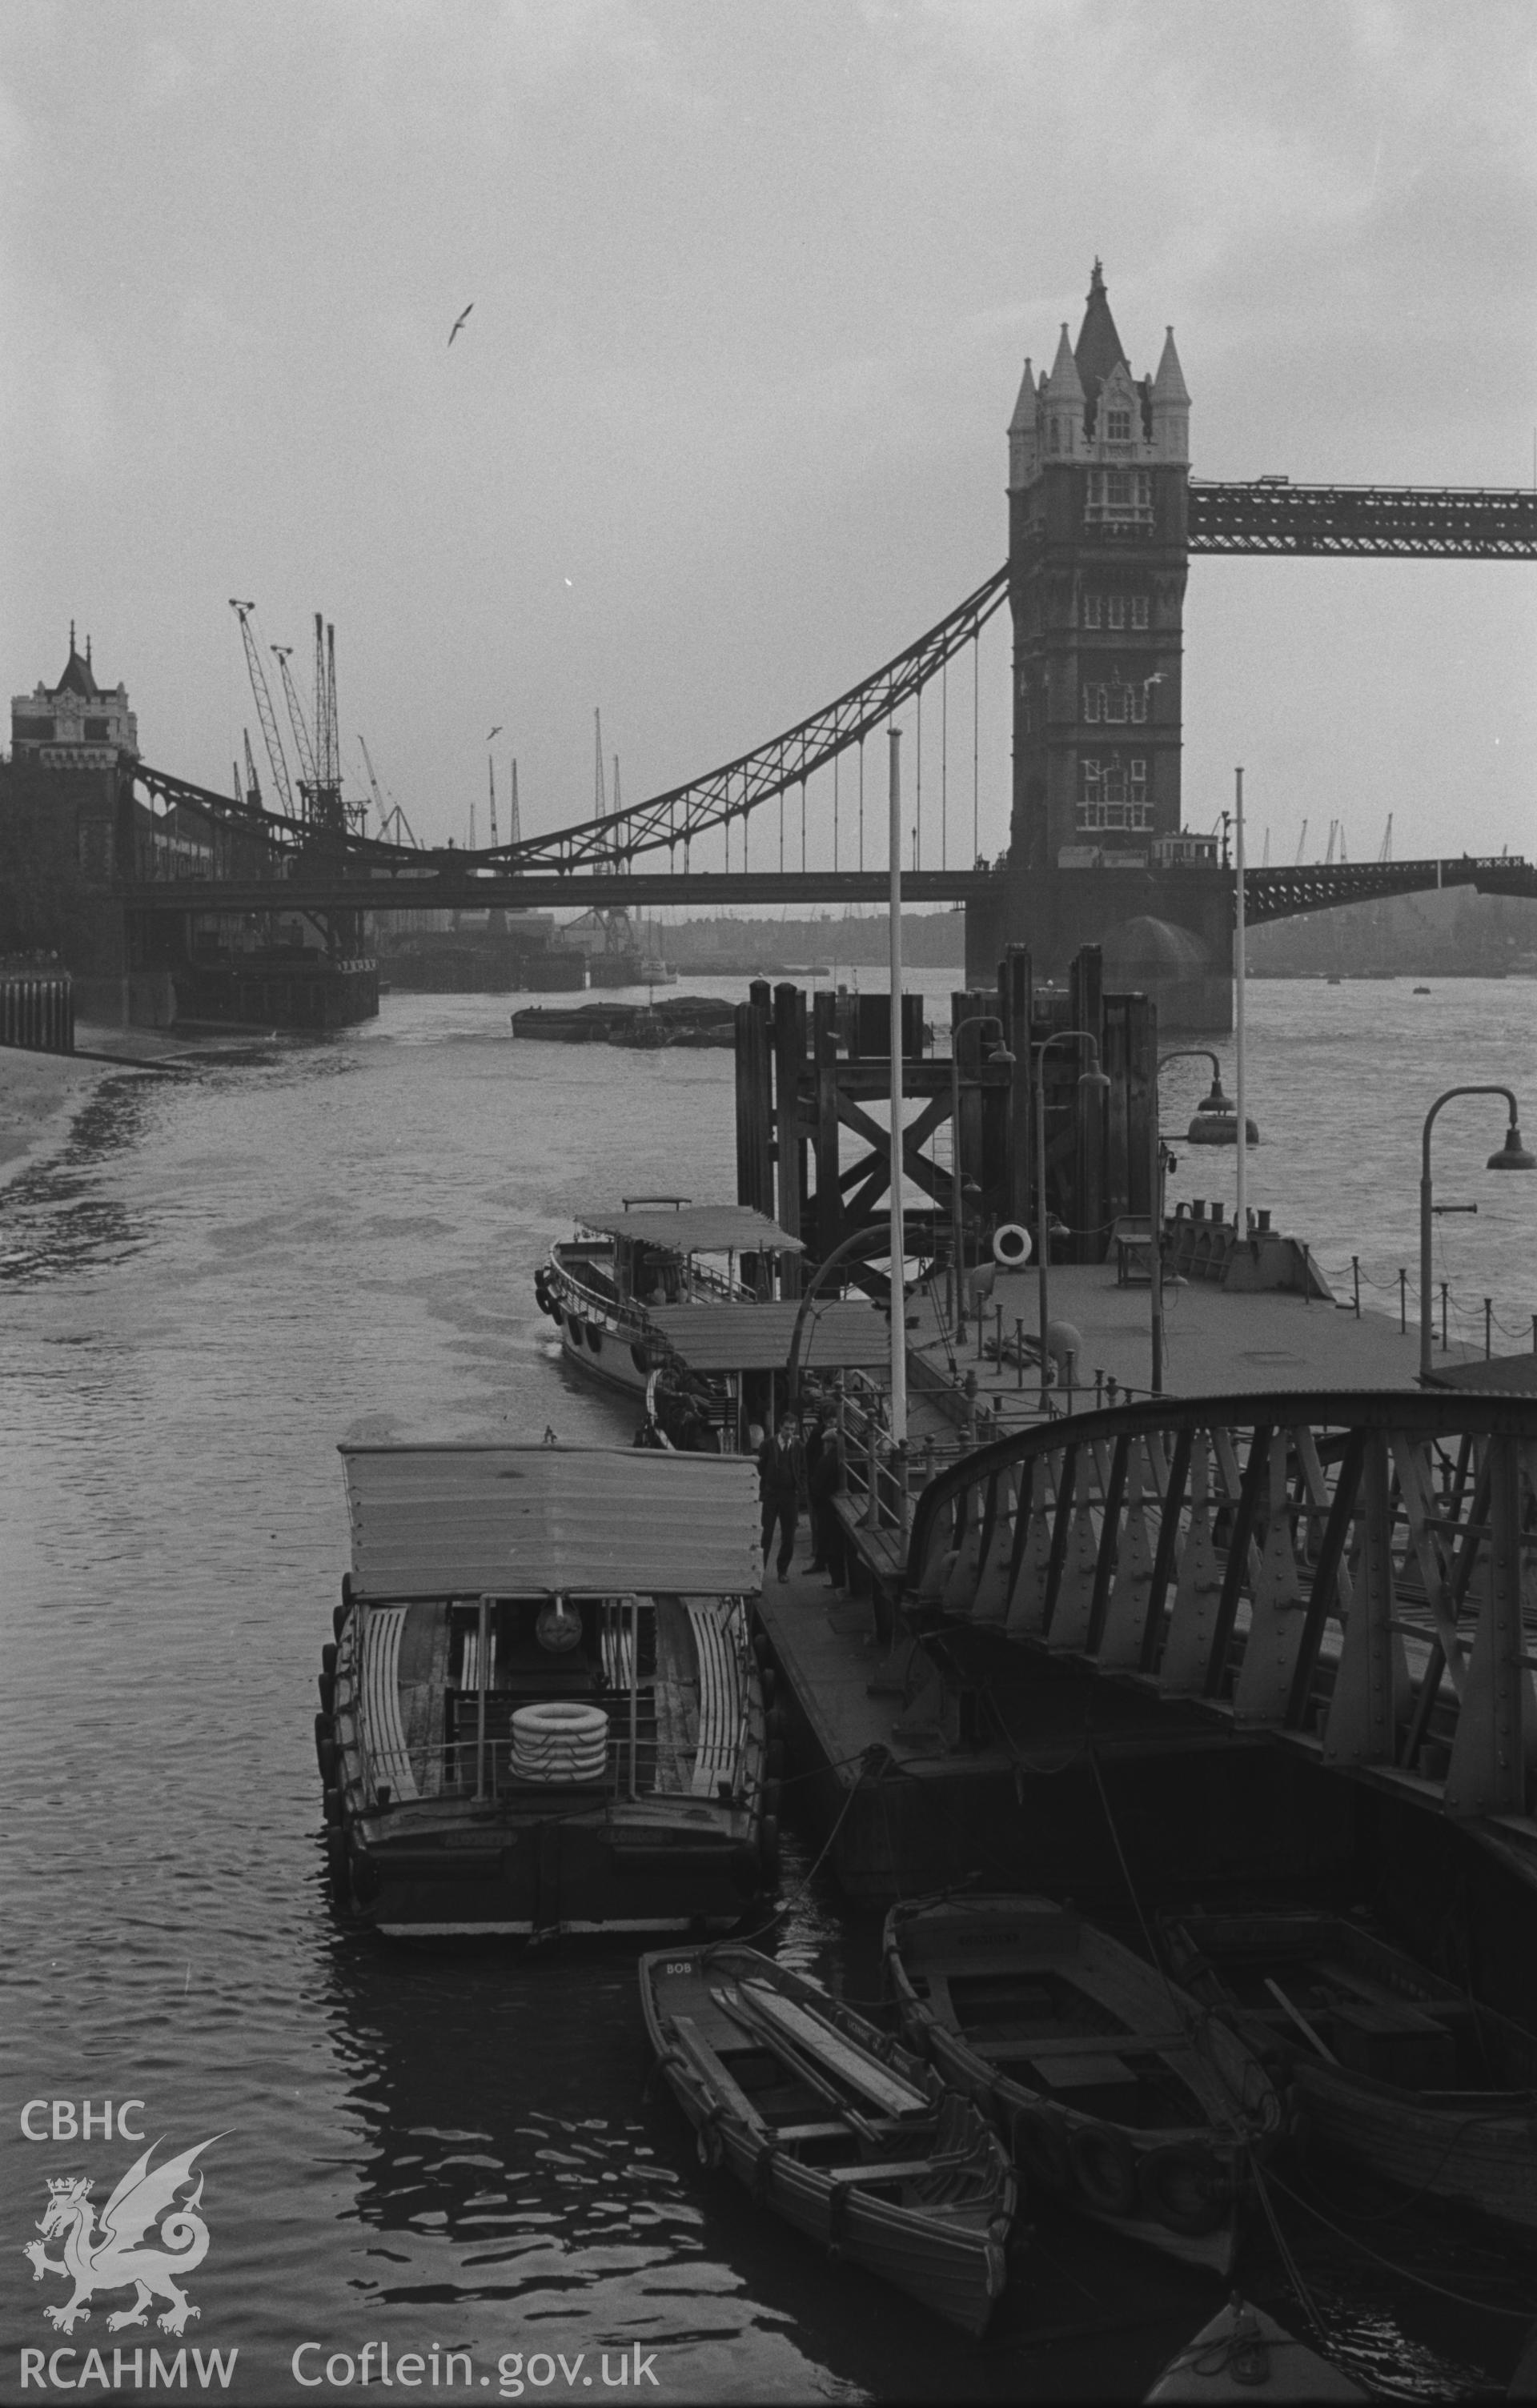 Black and White photograph showing buildings on the Thames, London.